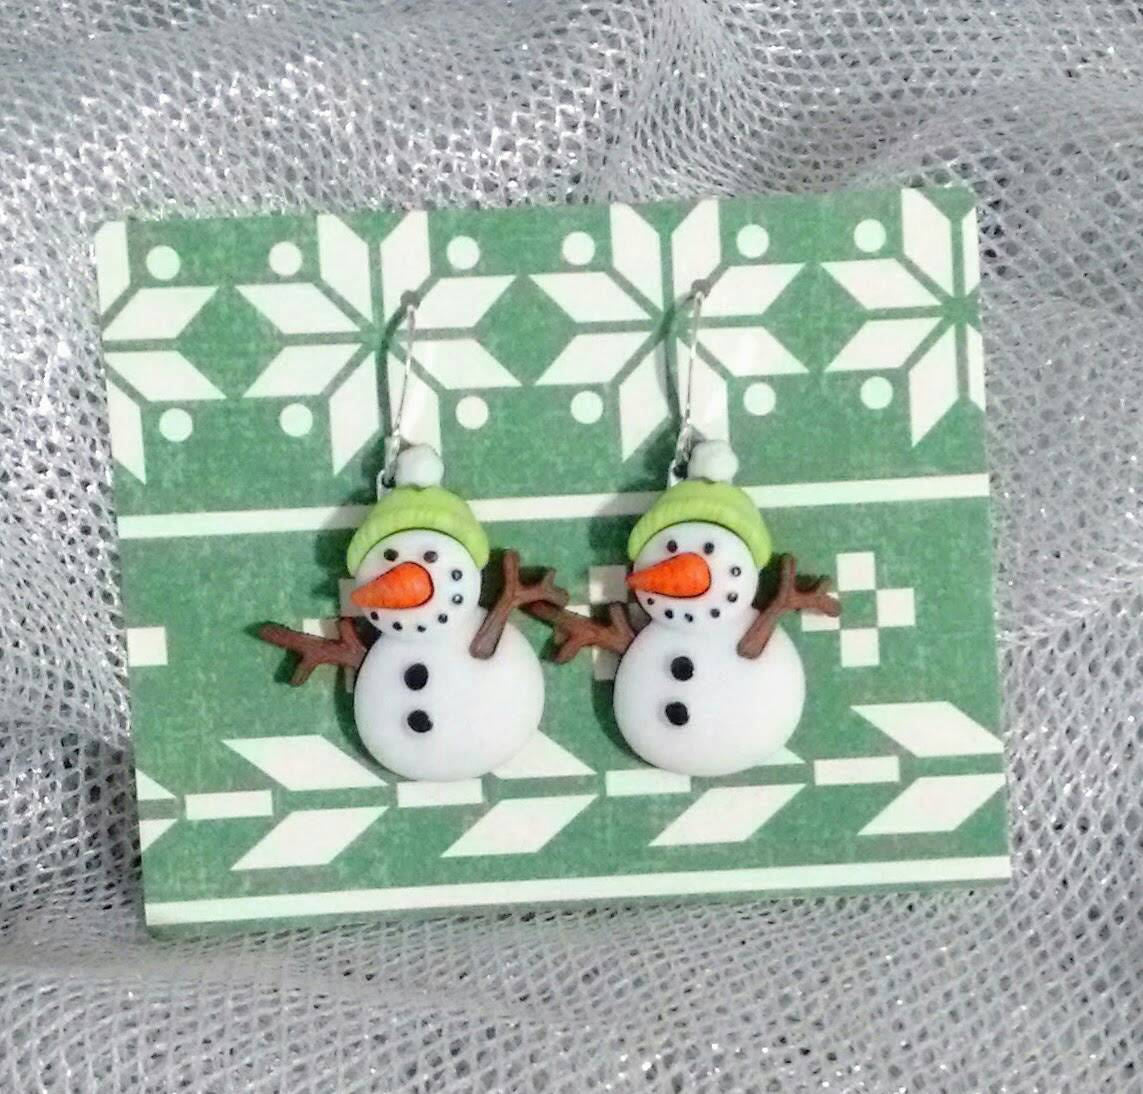 snowman with scarf earrings snowman jewelry snowmen Christmas earrings snowman earrings holiday earrings gifts for her gifts under 10 winter